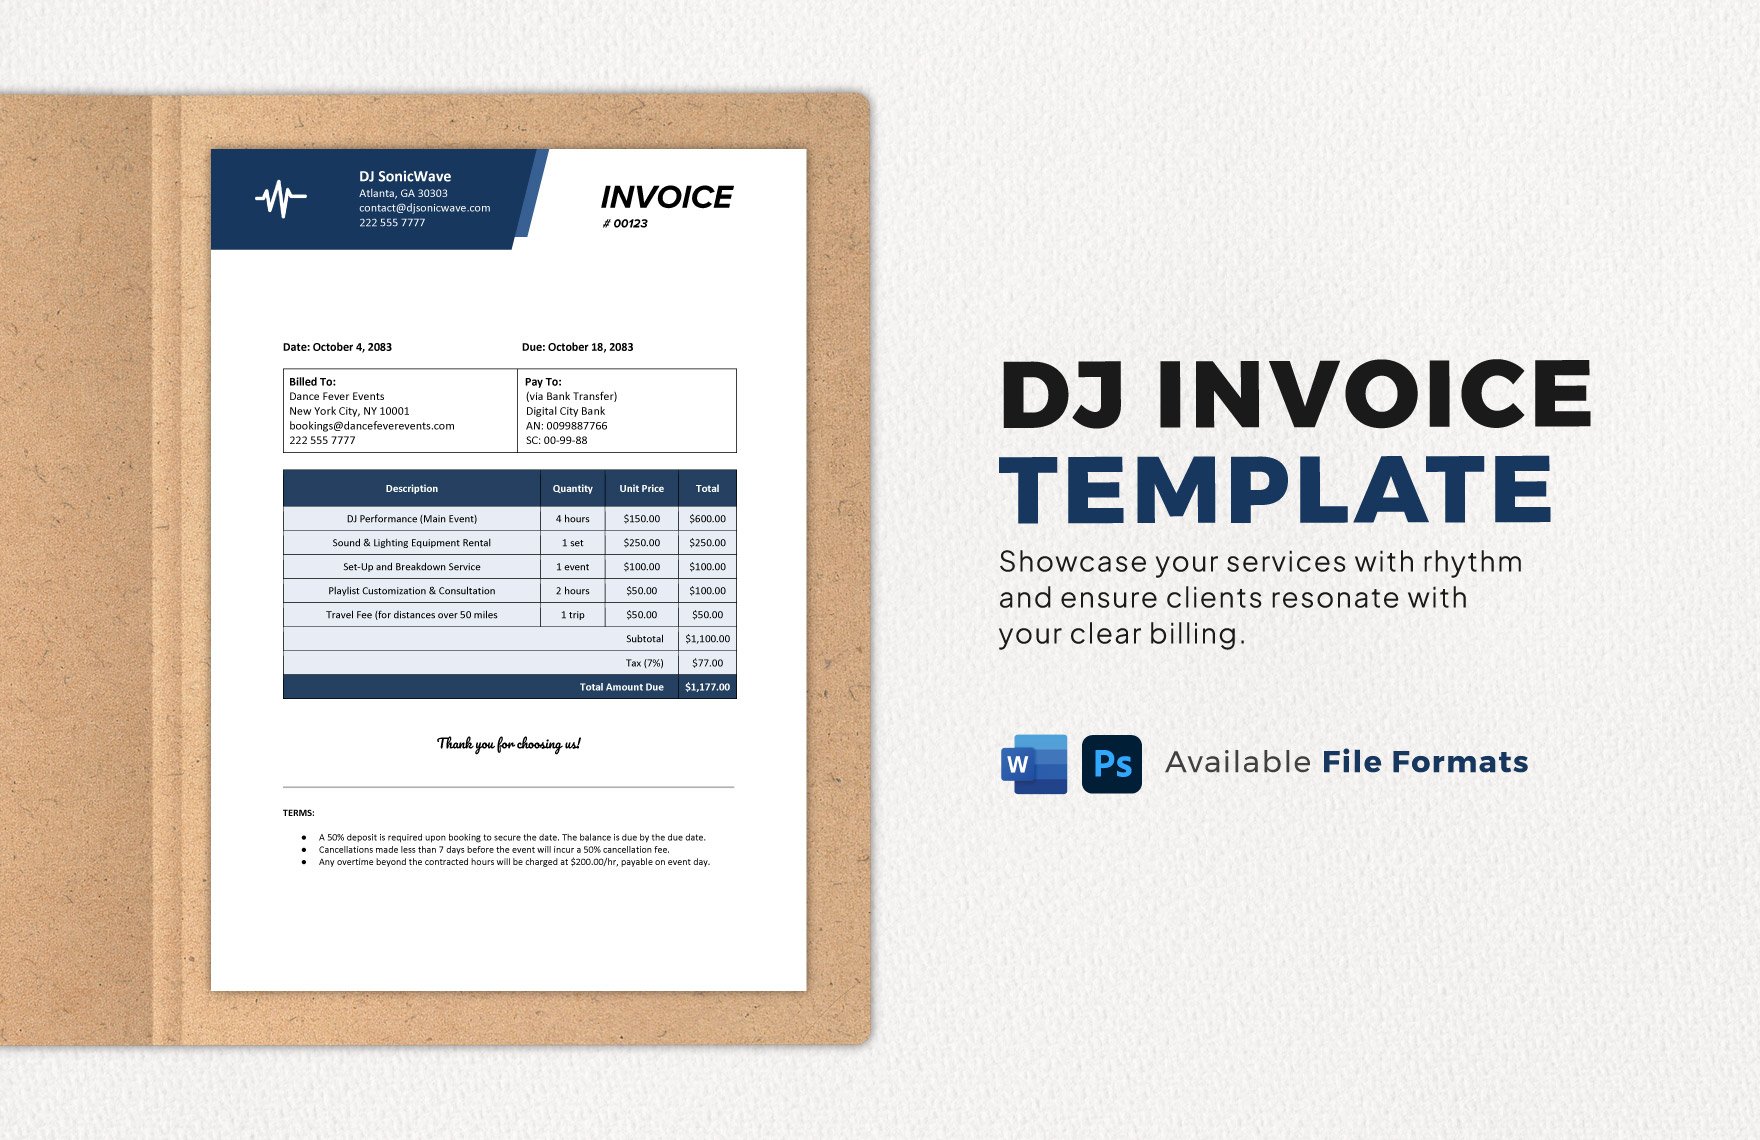 DJ Invoice Template in Word, PSD